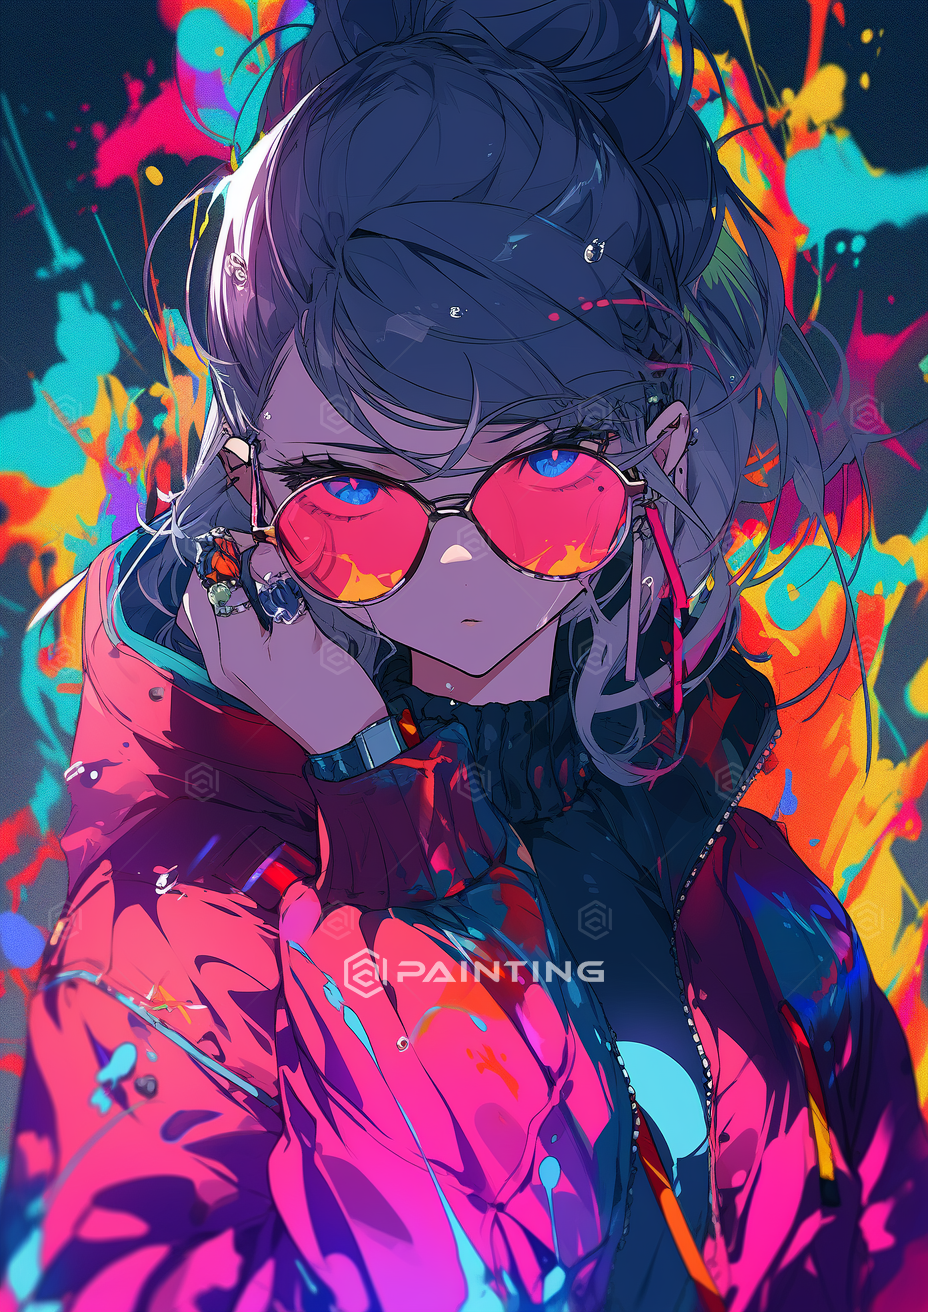 bright_anime_background_with_a_girl_wearing_sunglasses_in_t_4e941e2f-ee0b-41fe-be9c-38e52e7a10cc.png